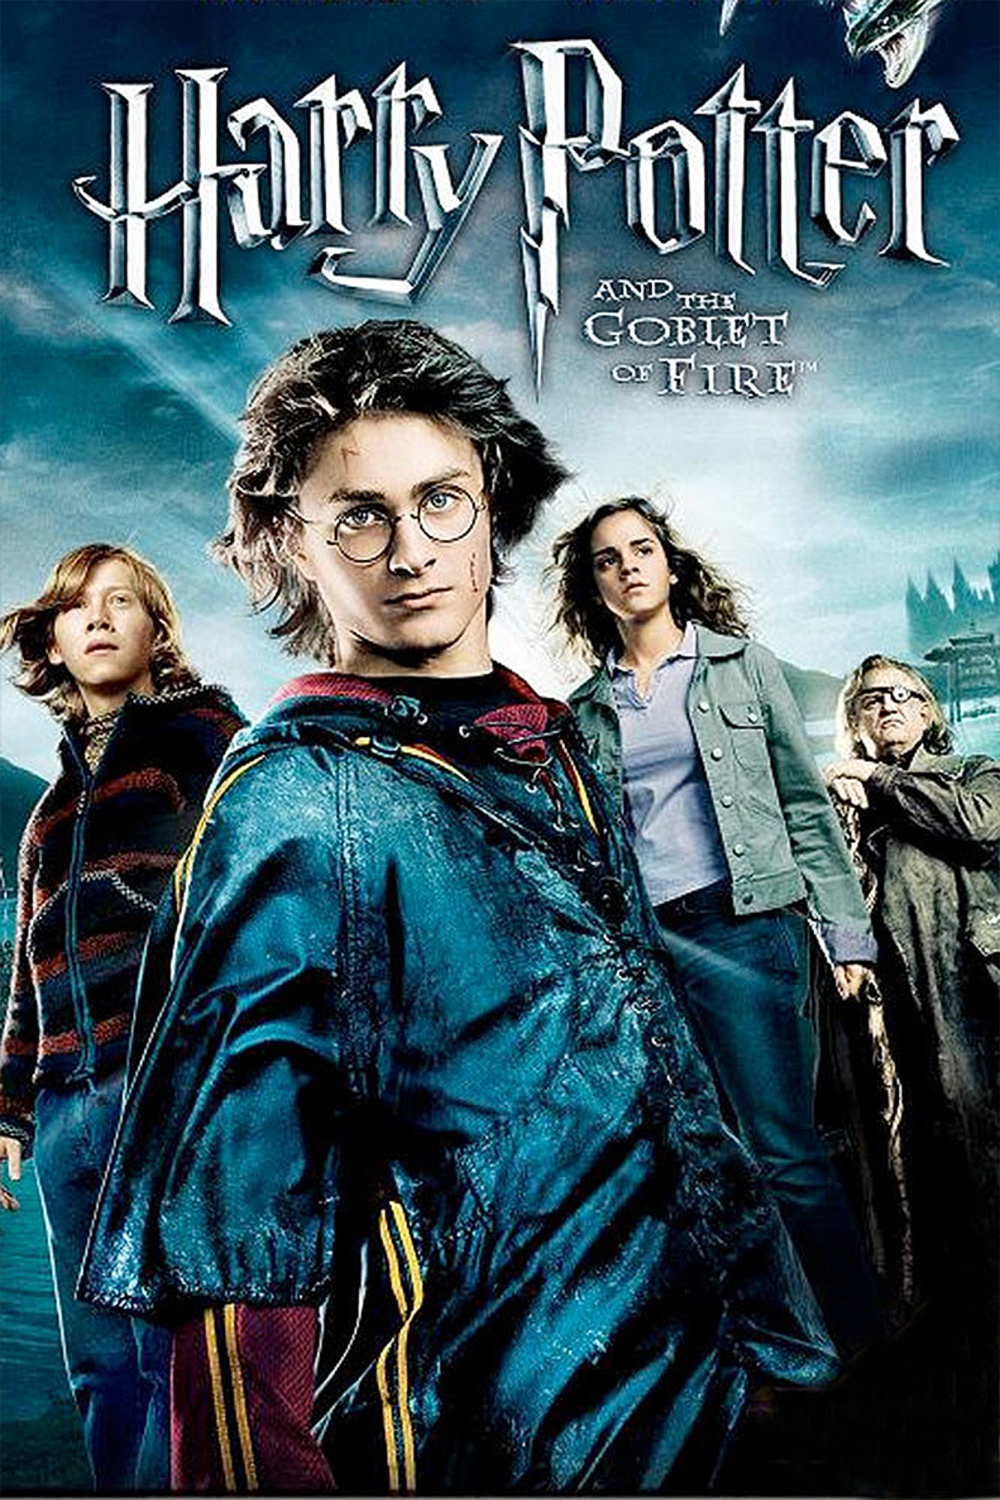 movie review of harry potter and the goblet of fire